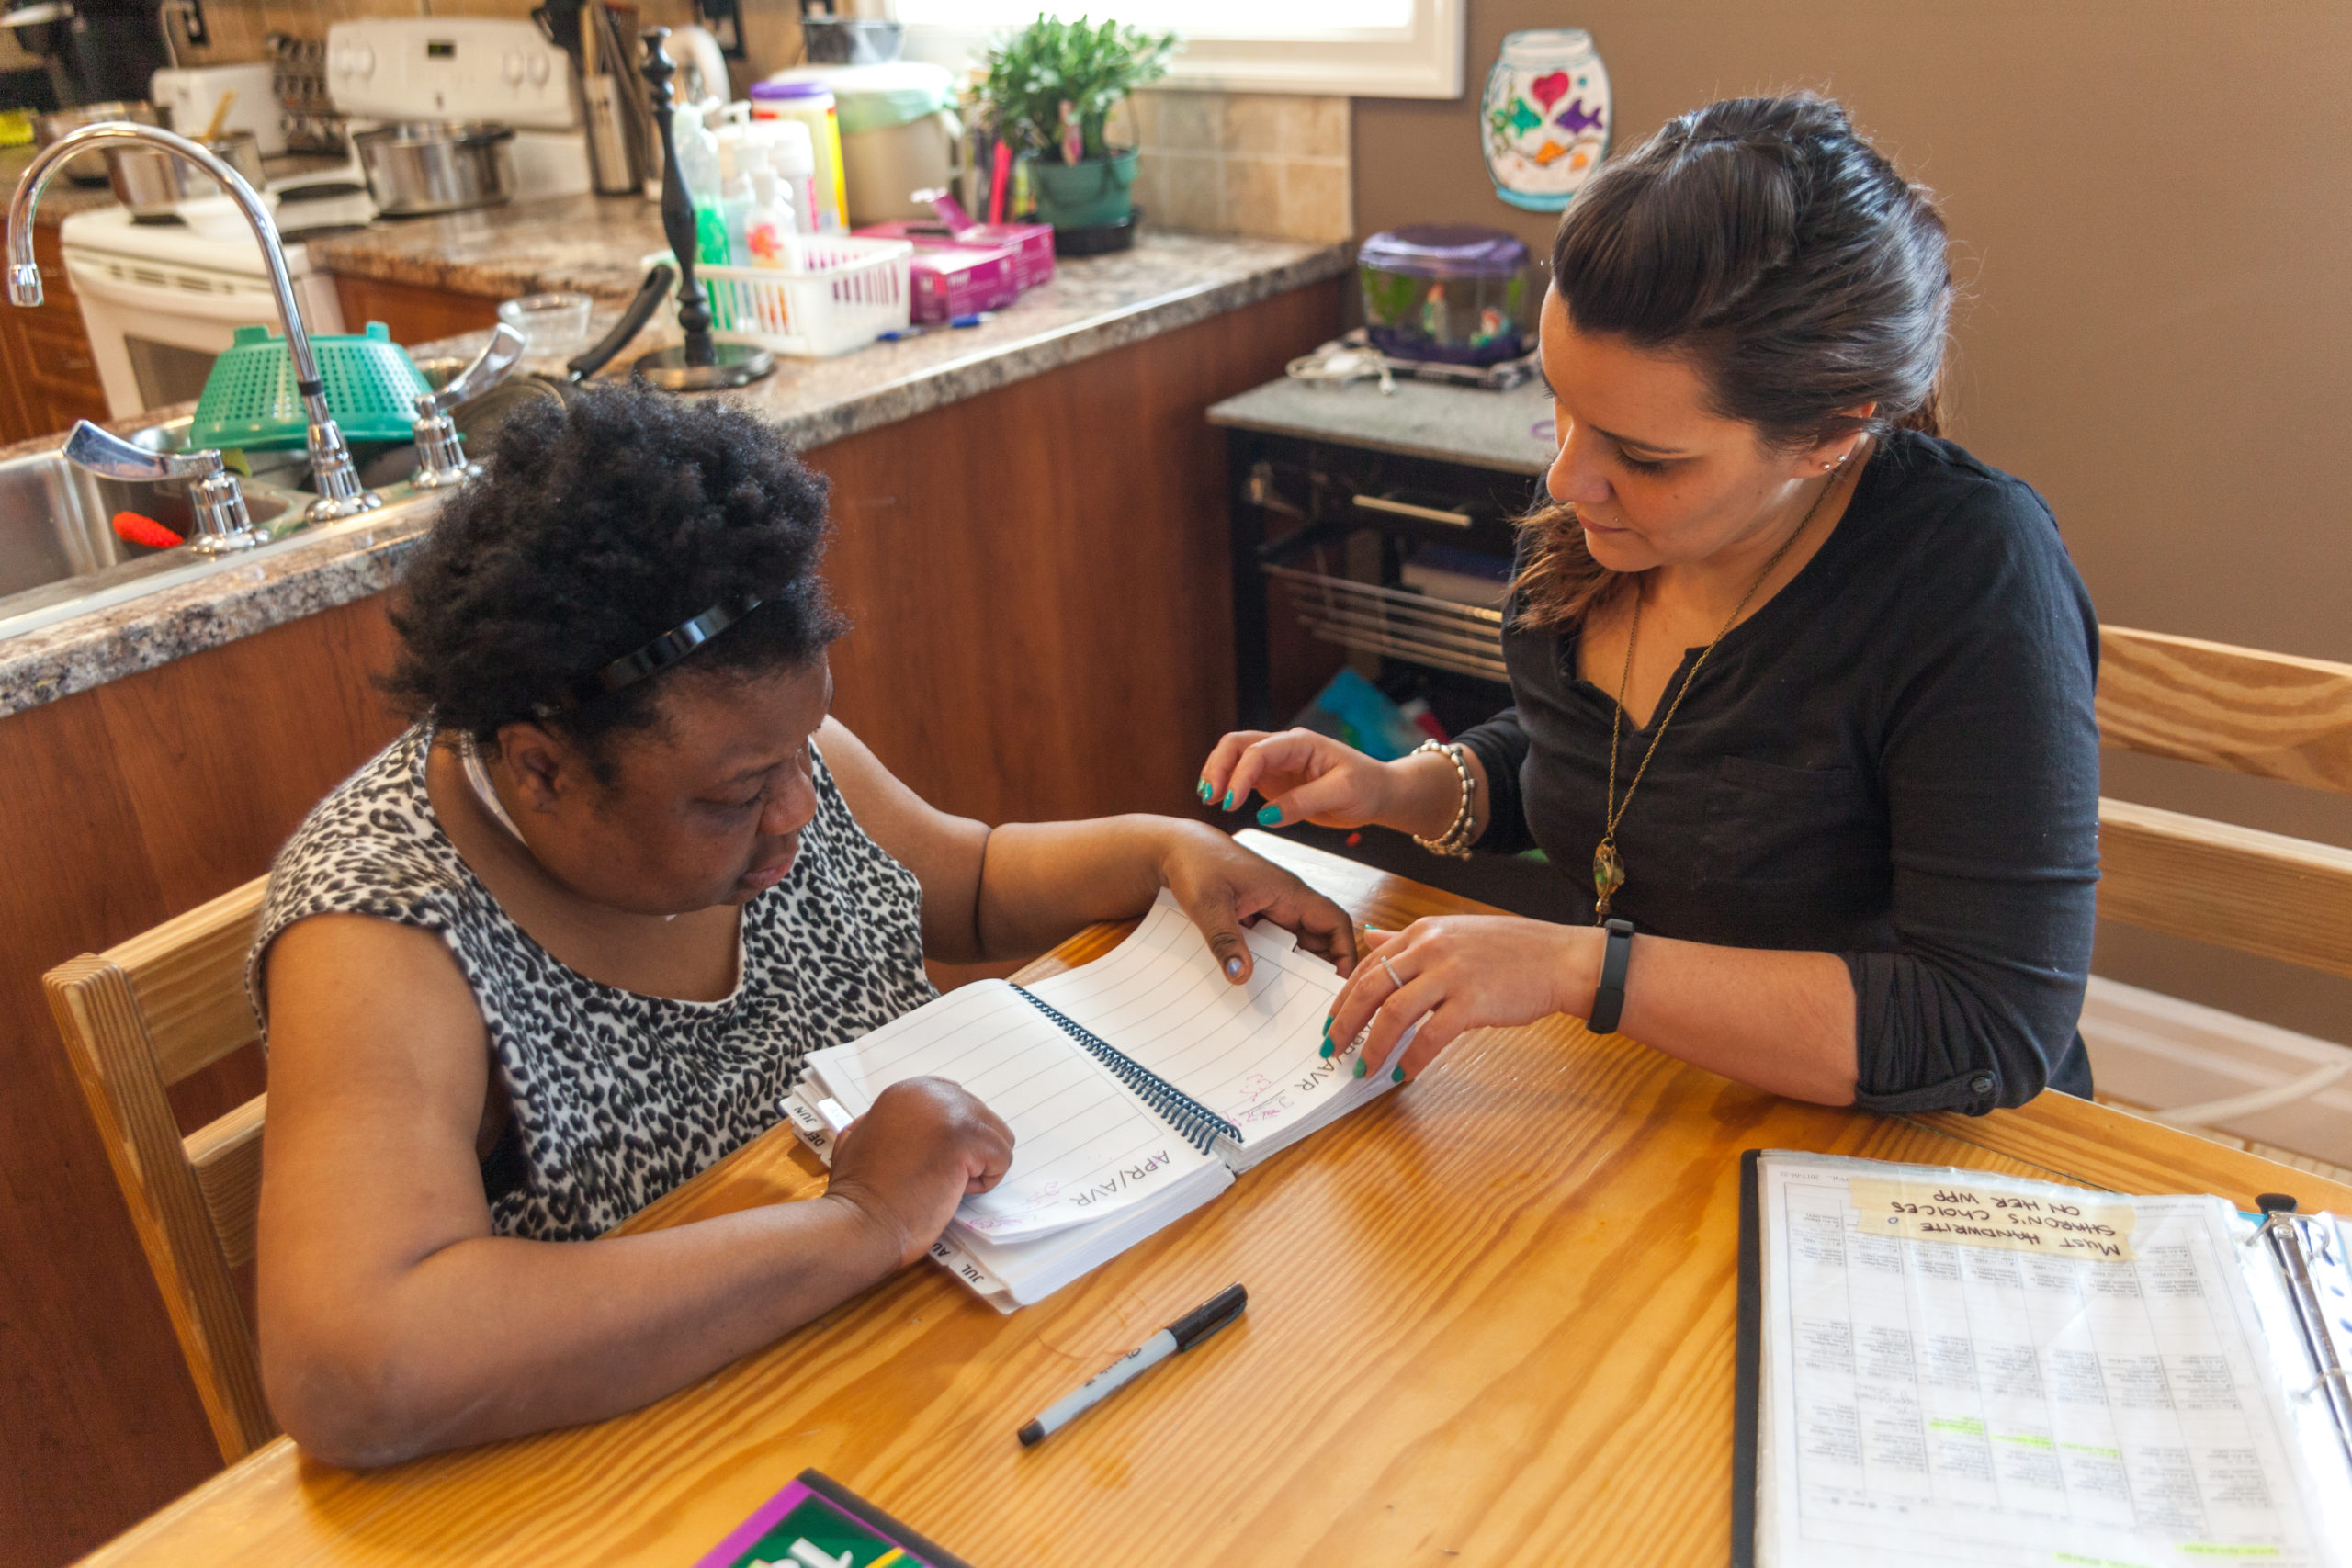 Intervenor sits with the woman she is supporting at a kitchen table, the two interact as the woman writes in a notebook.